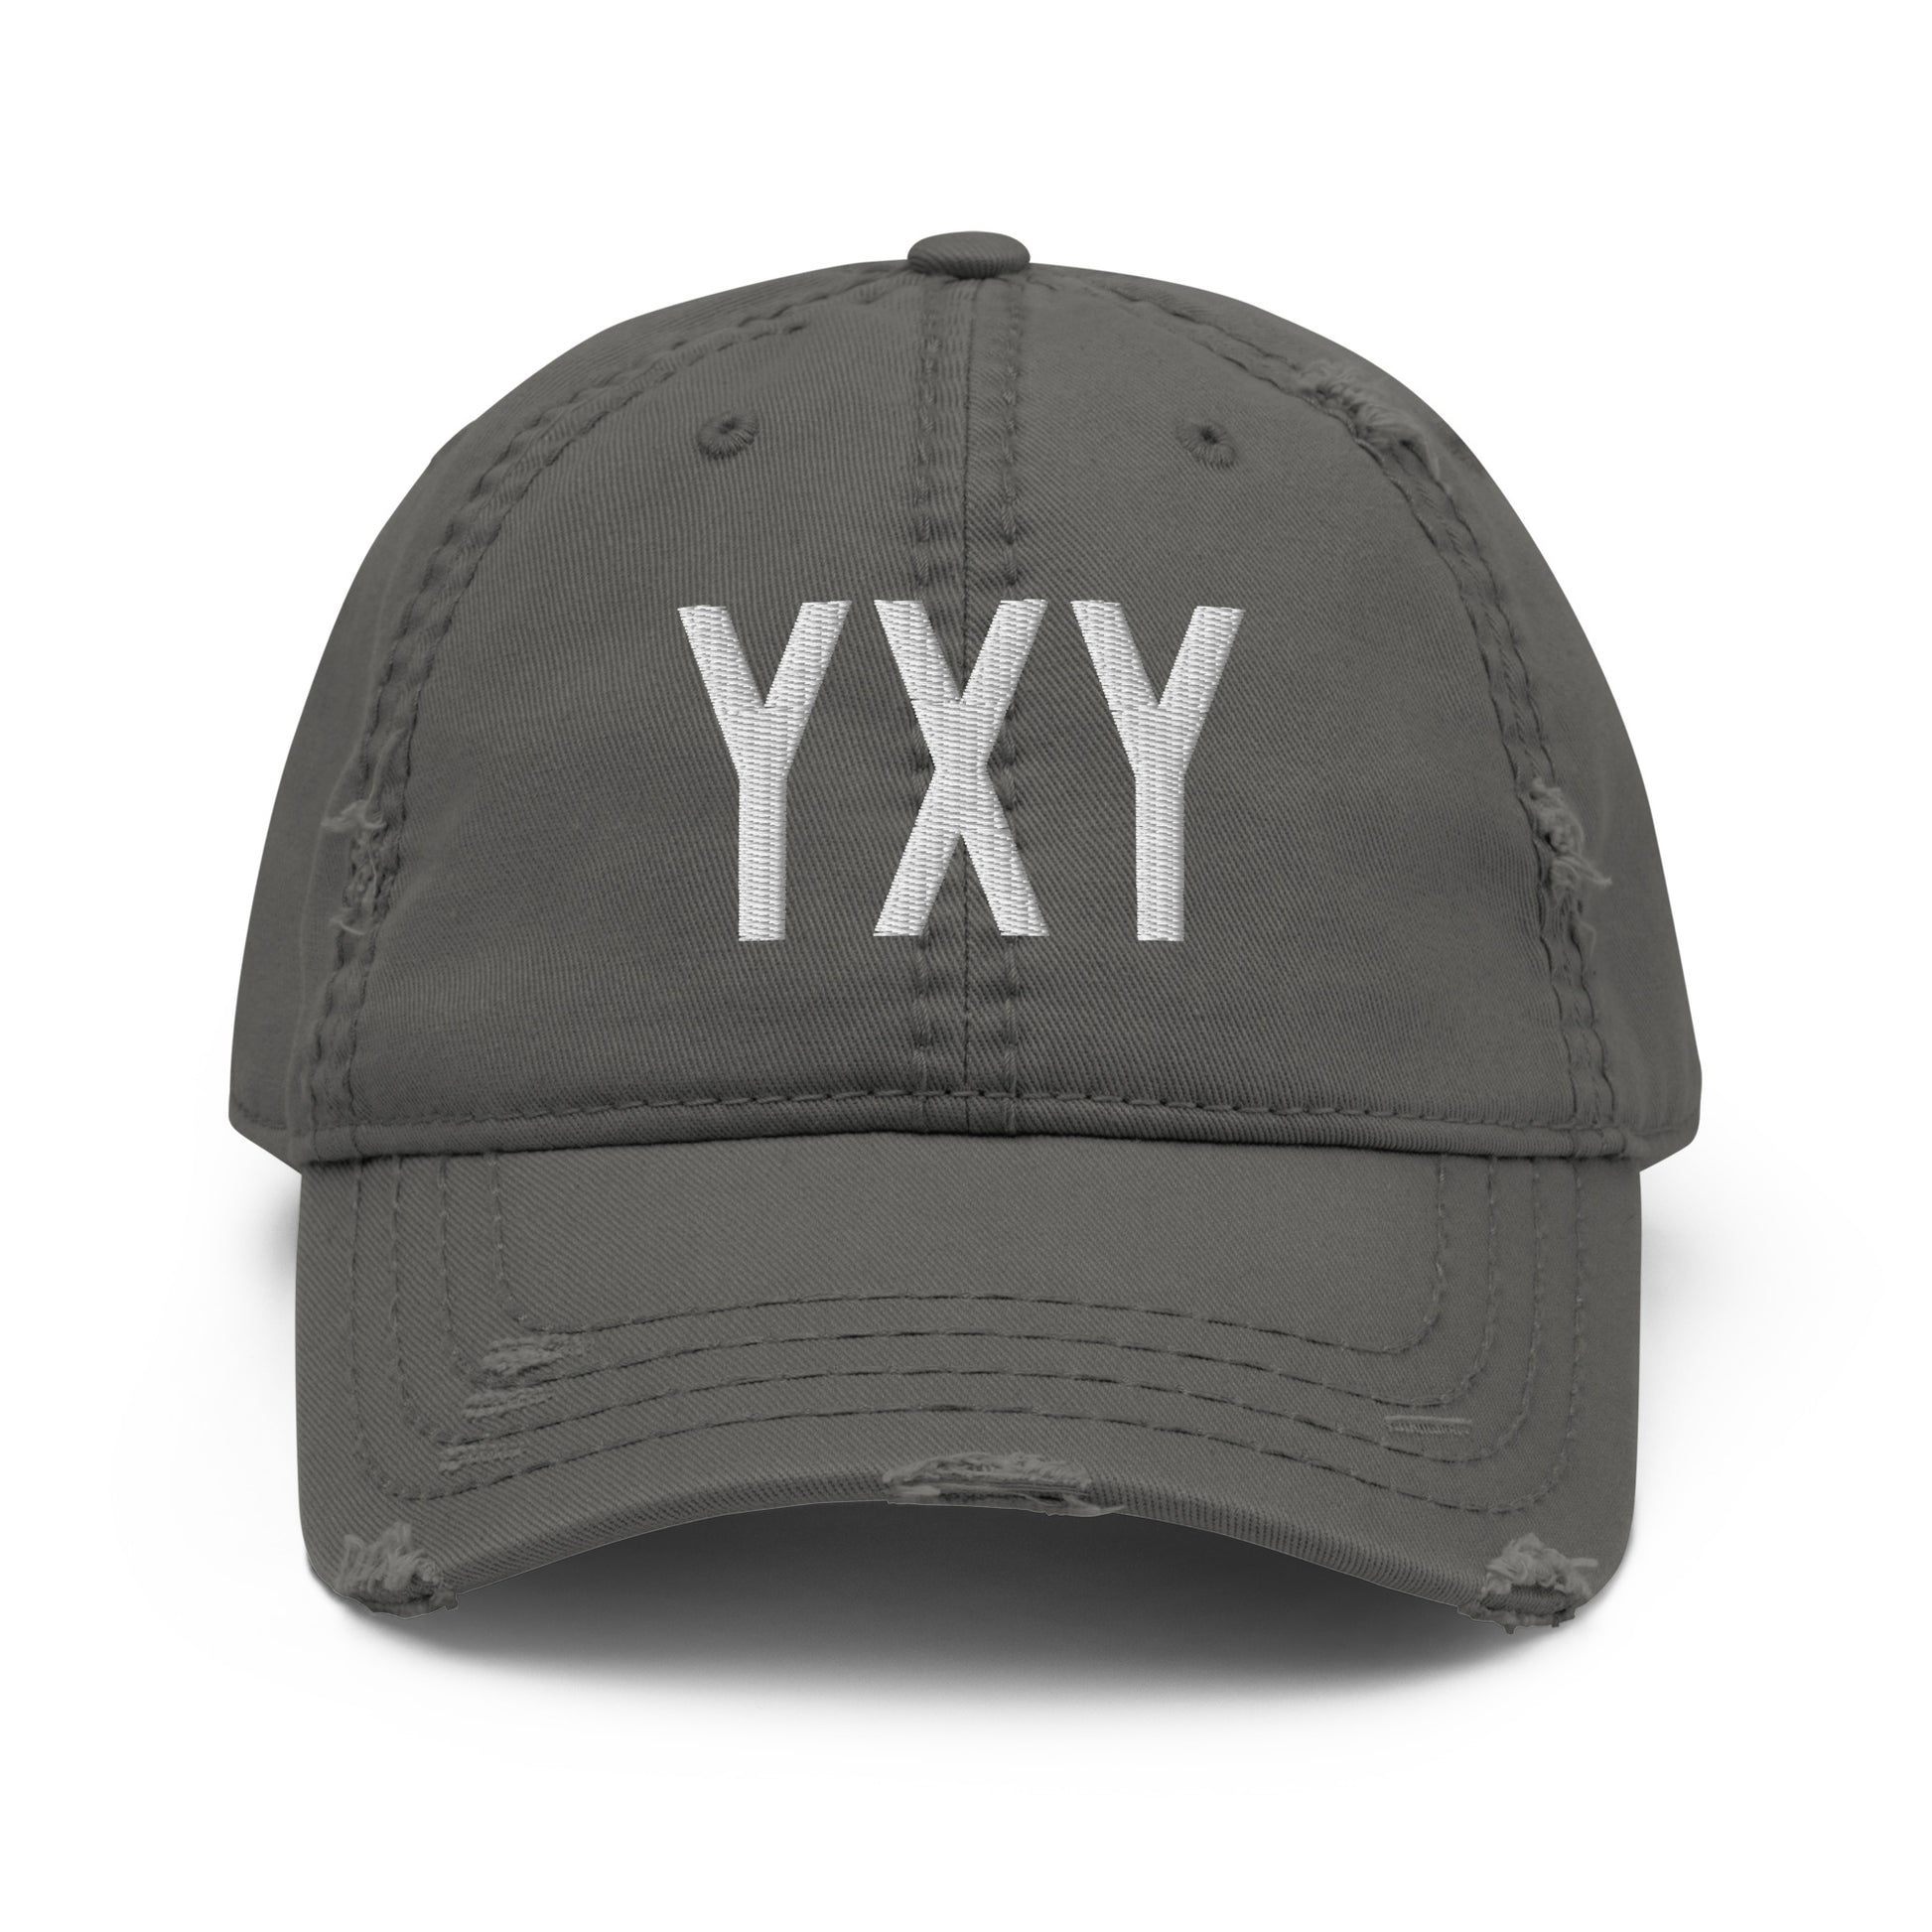 Airport Code Distressed Hat - White • YXY Whitehorse • YHM Designs - Image 15